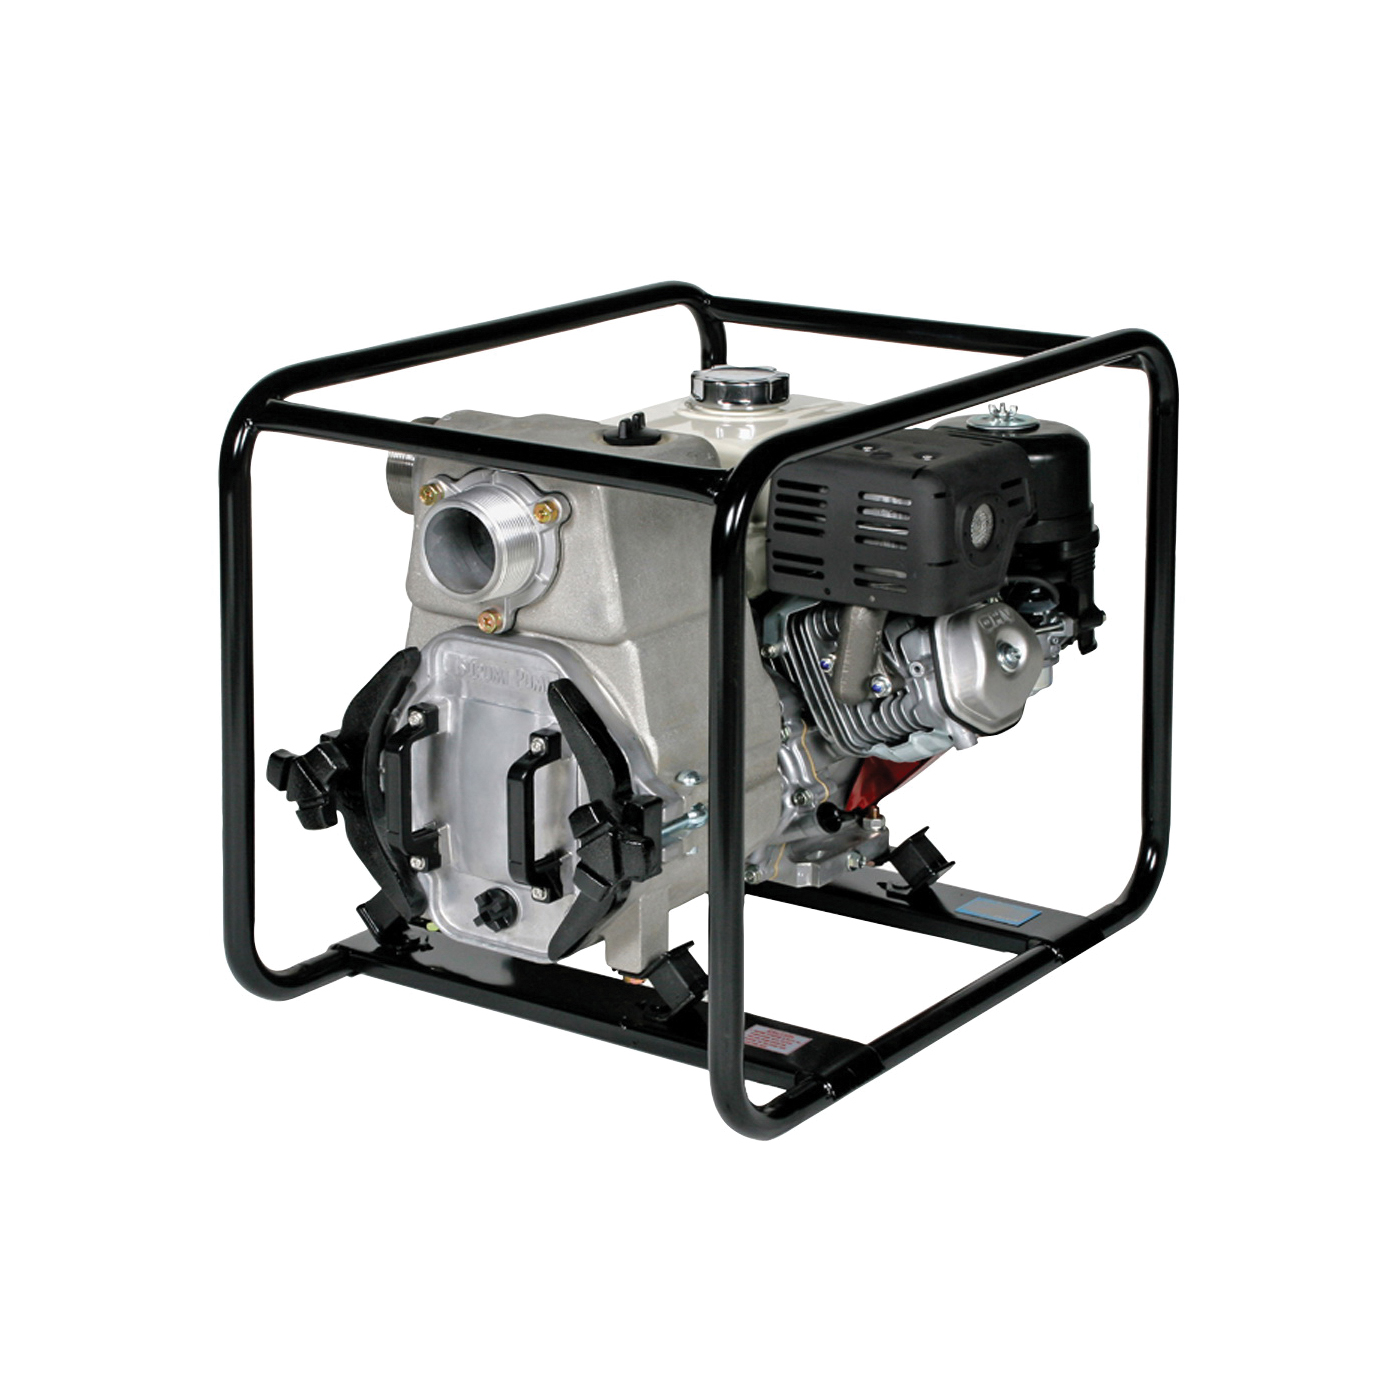 EPT3-80HA Trash Pump, 8 hp, 3 in Outlet, 96 ft Max Head, 360 gpm, Iron/Stainless Steel